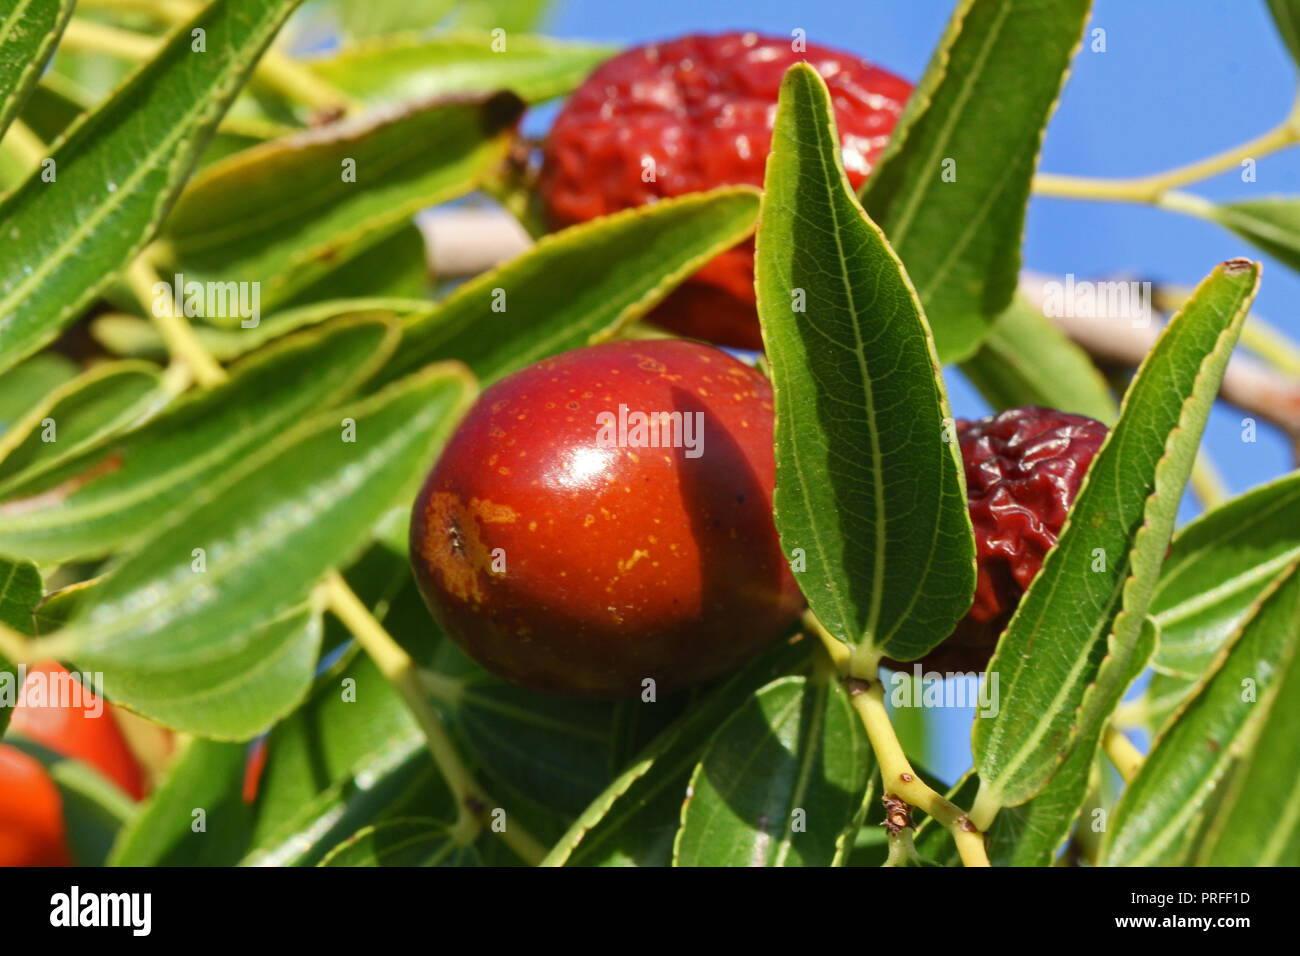 jujube fruit or drupe Latin ziziphus jujuba ripening on a bush in Italy various names including red date related to buckthorn family rhamnaceae Stock Photo